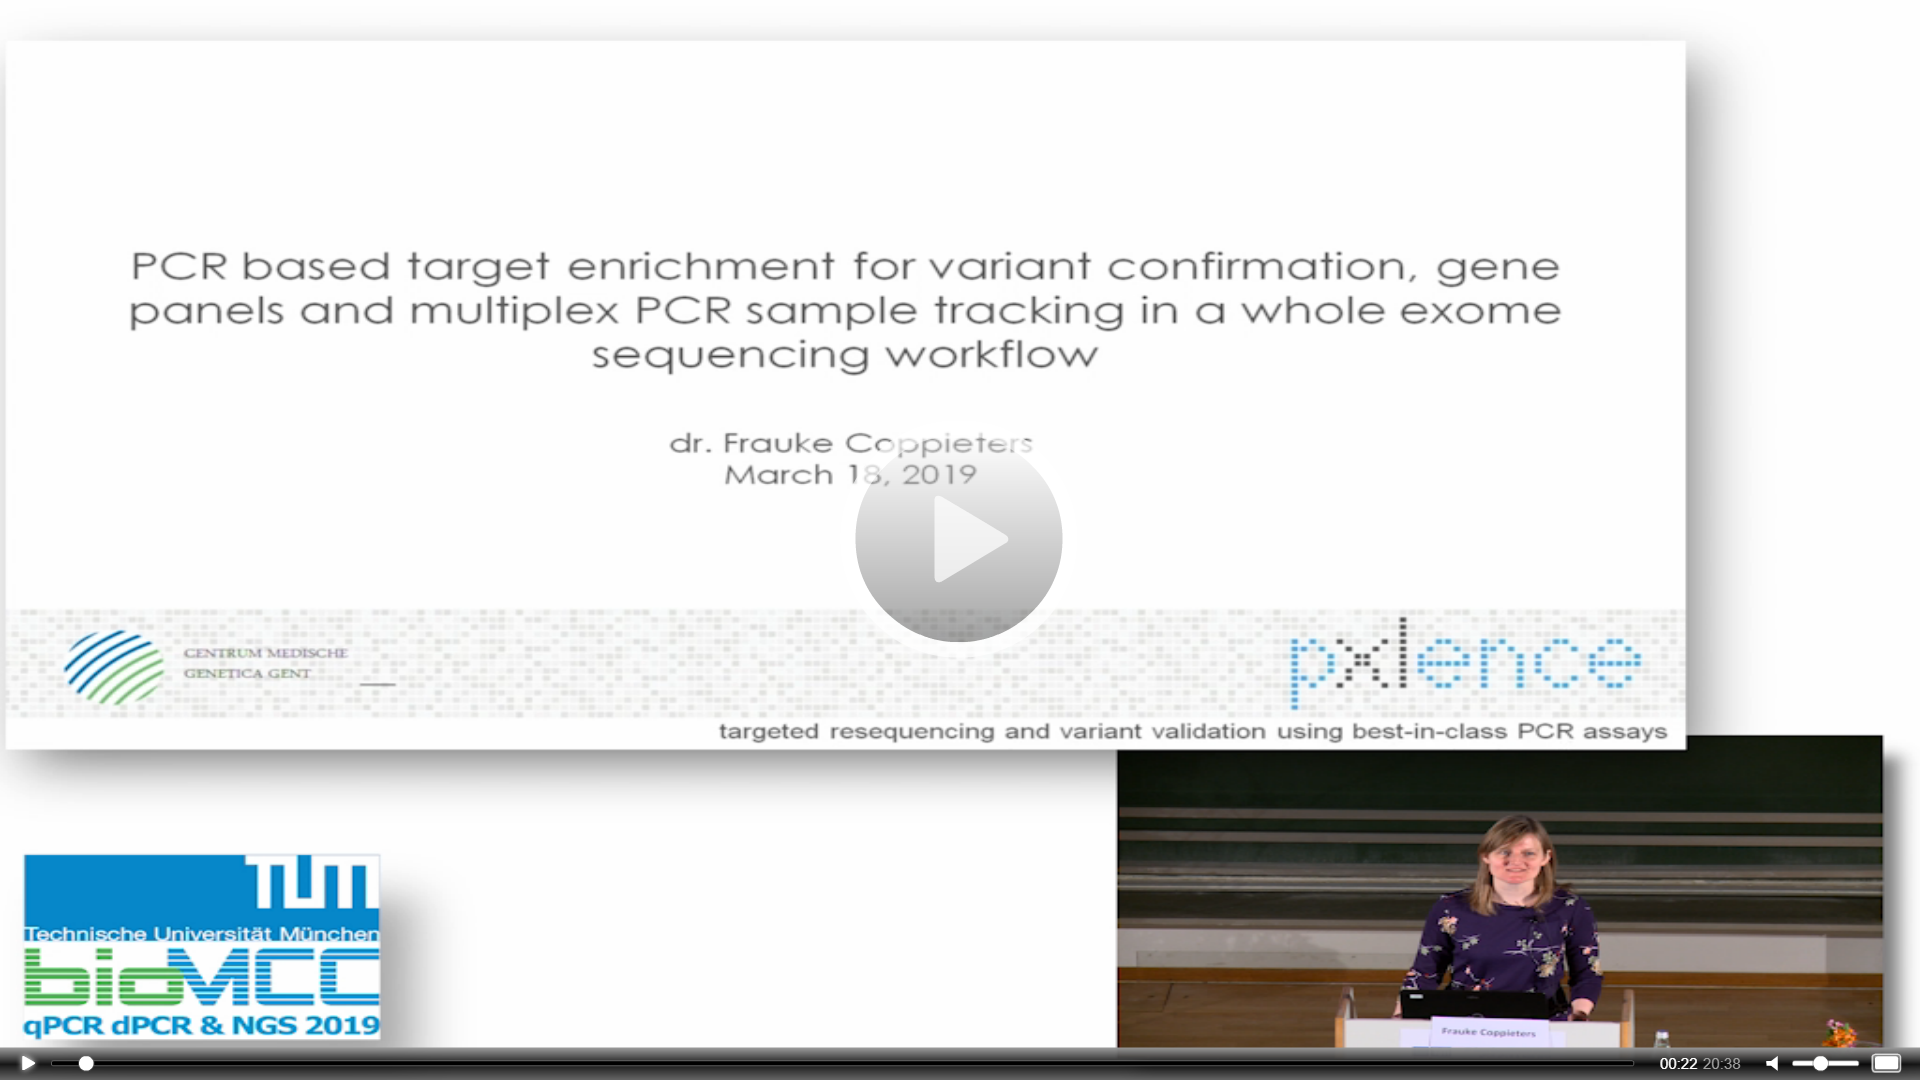 PCR Based Target Enrichment For Variant Confirmation, Gene Panels And Multiplex PCR Sample Tracking In A Whole Exome Sequencing Workflow